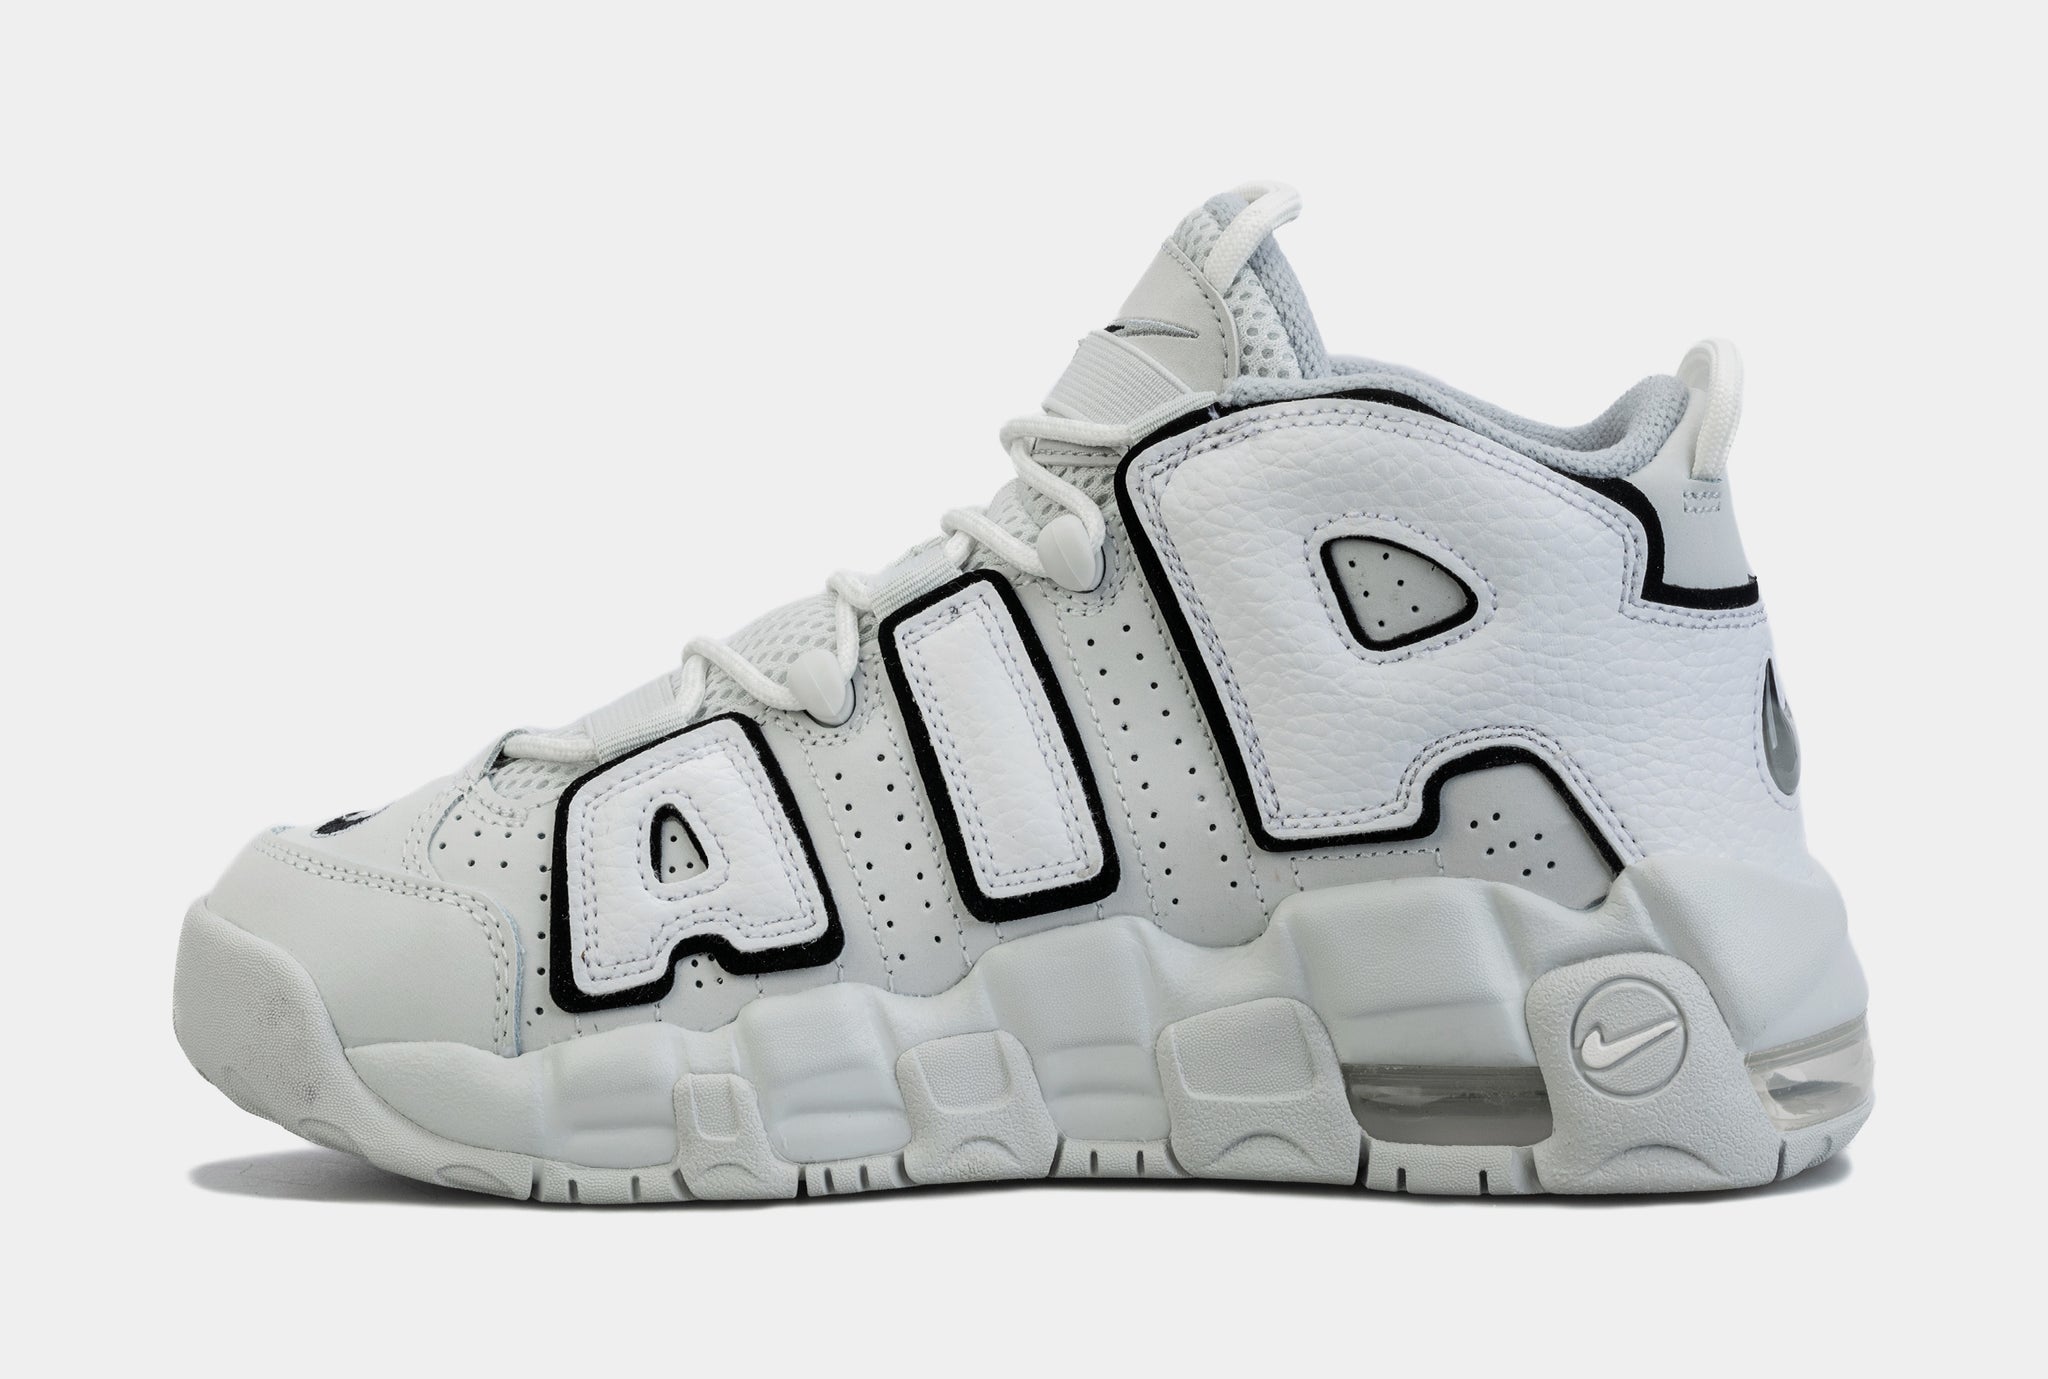 How to Win the Triple White Nike Uptempo Collection